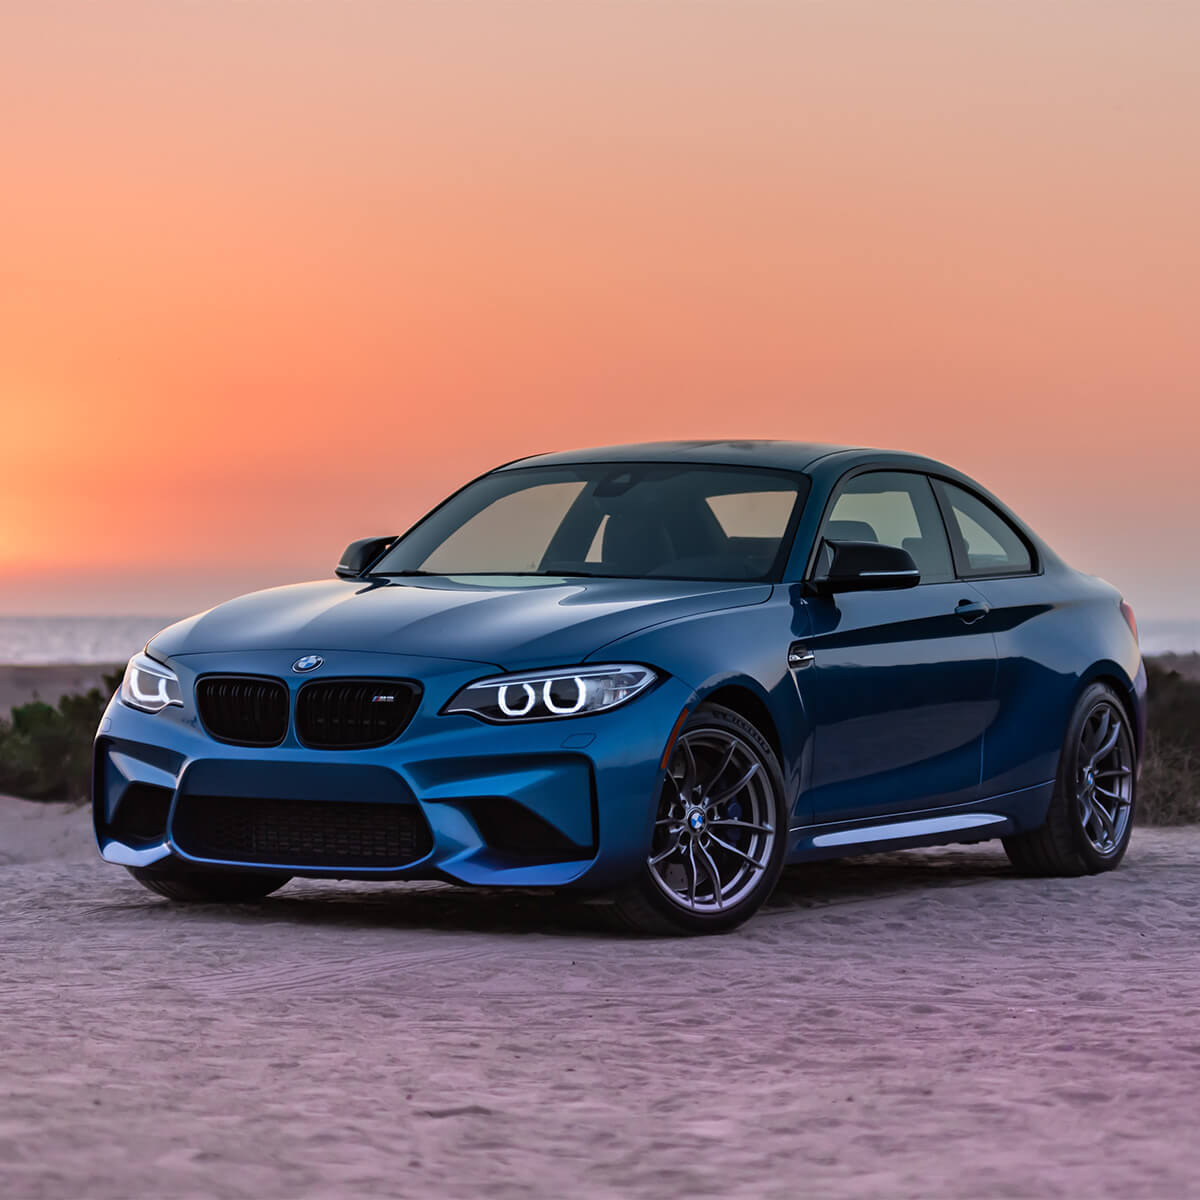 Blue BMW M2 factory bumper and halo LED headlights